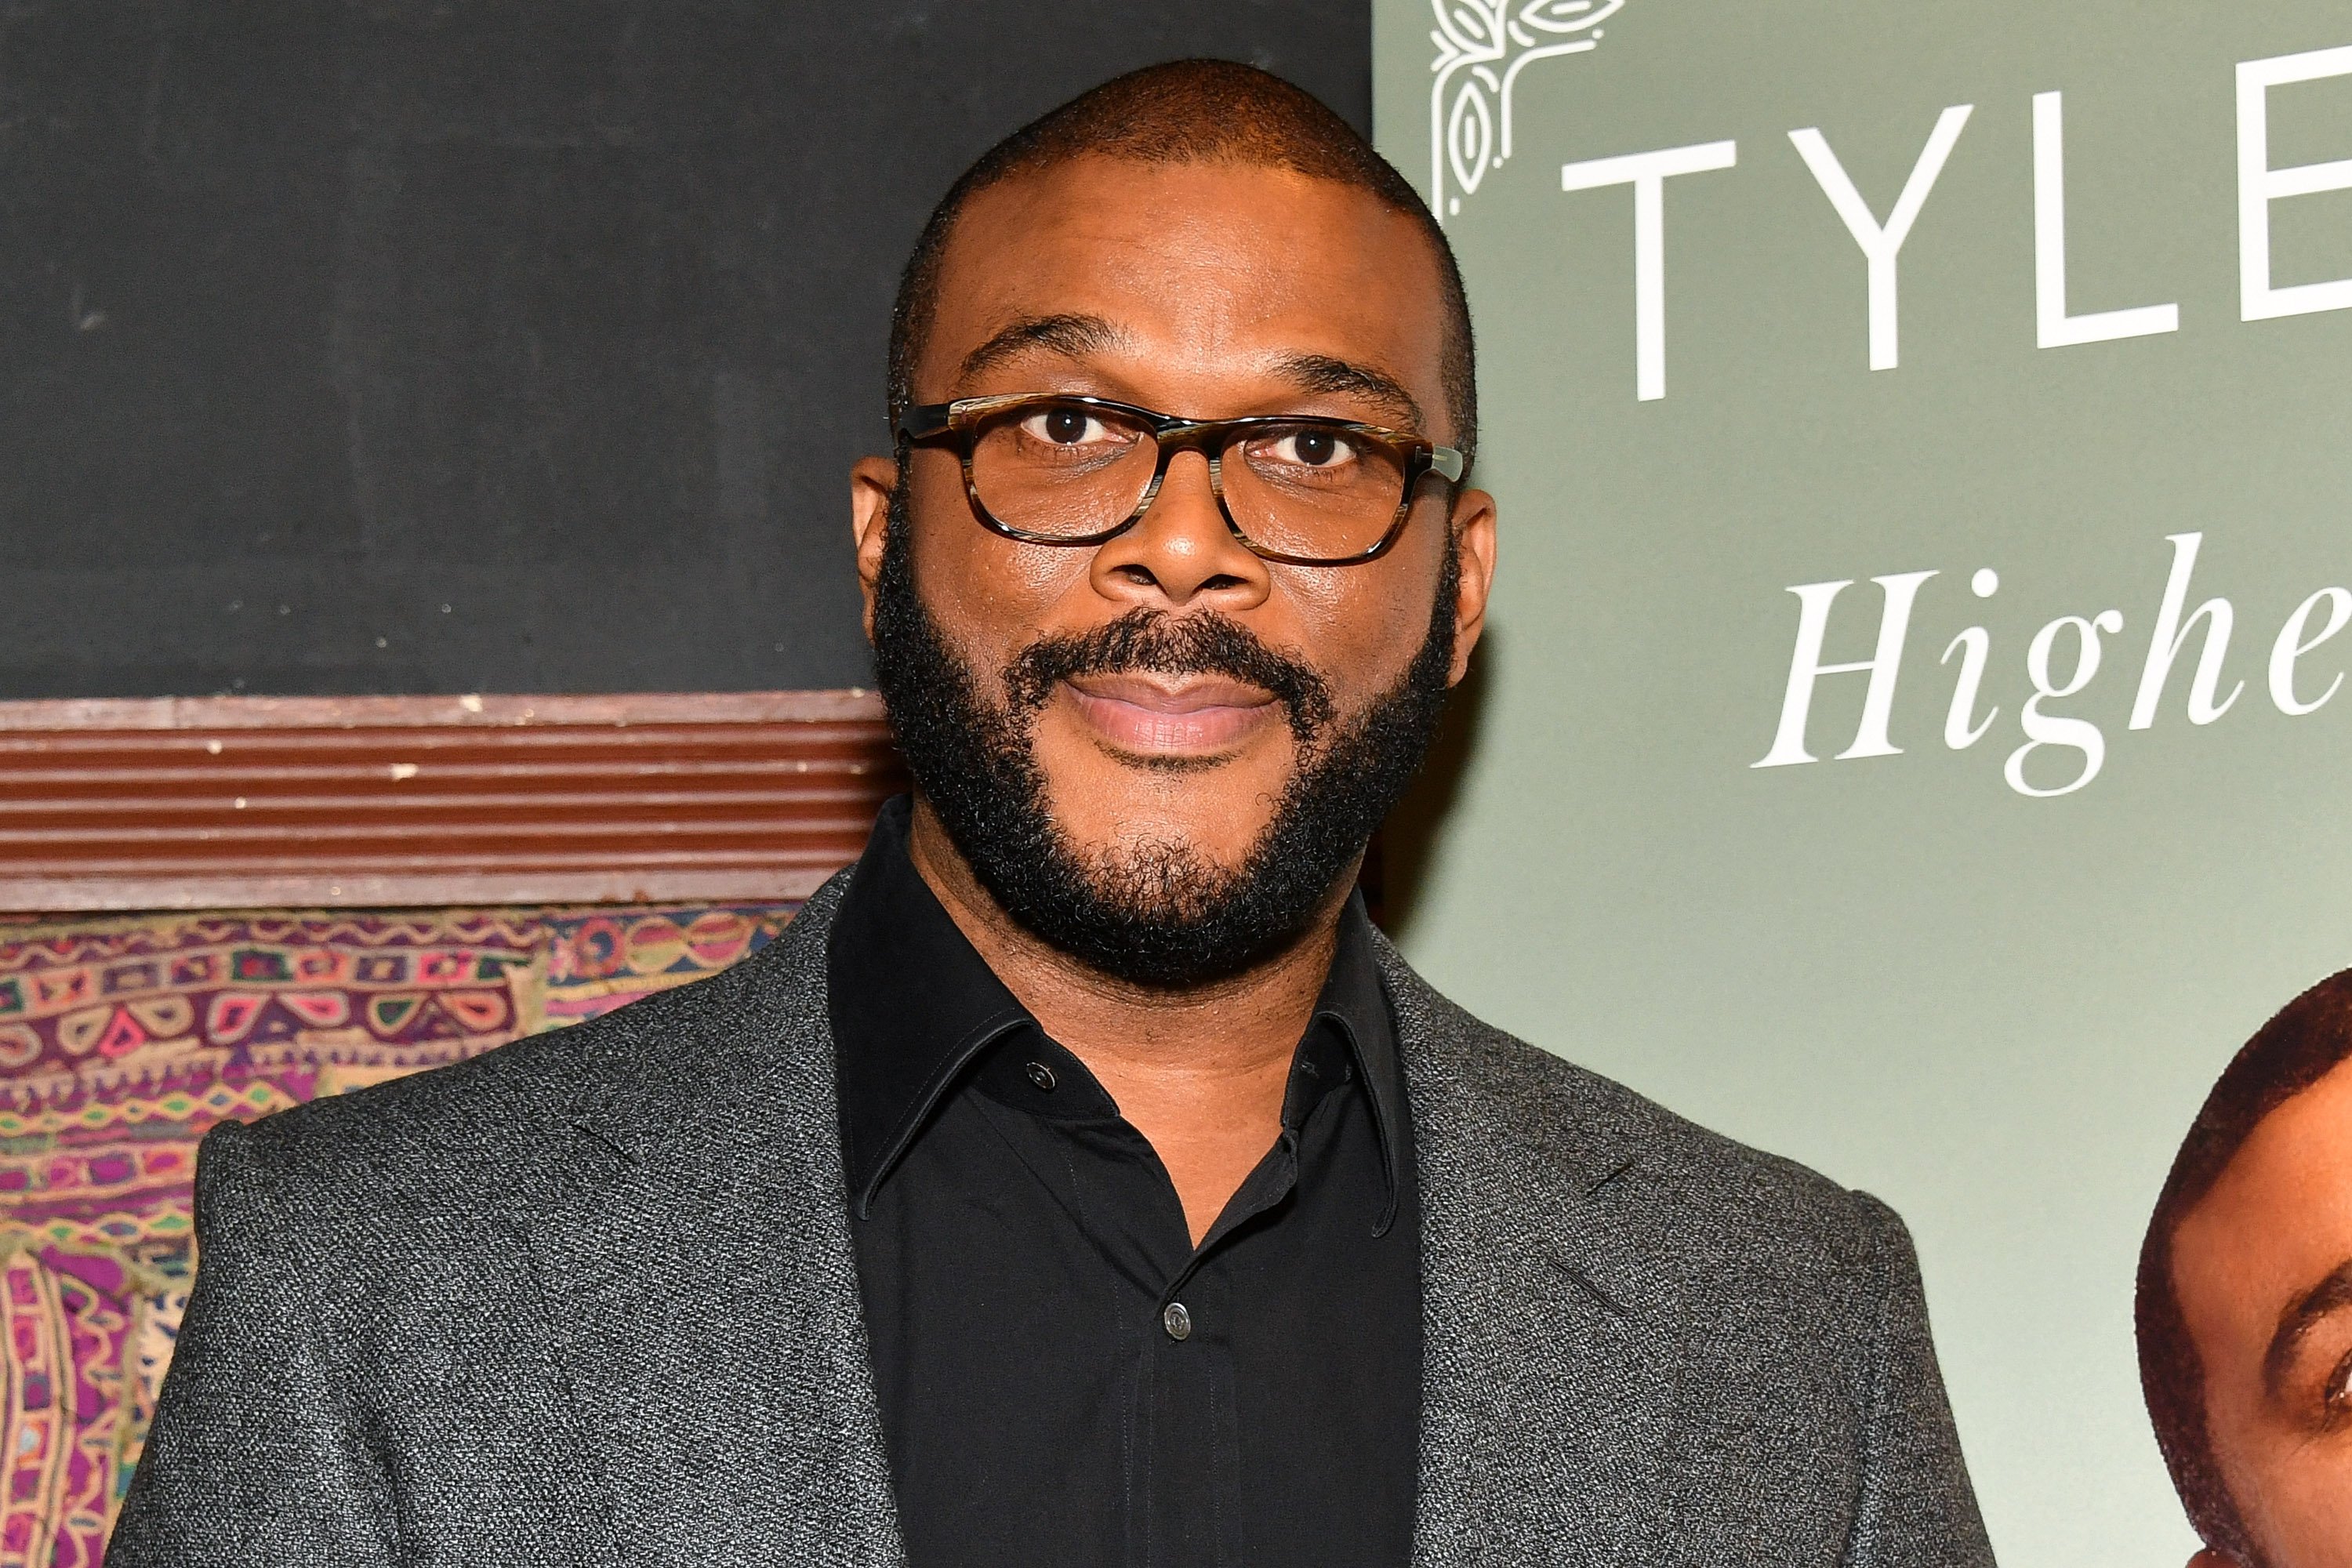 Tyler Perry launches his new book "Higher Is Waiting" at the Gramercy Theatre on November 14, 2017. | Photo: Getty Images